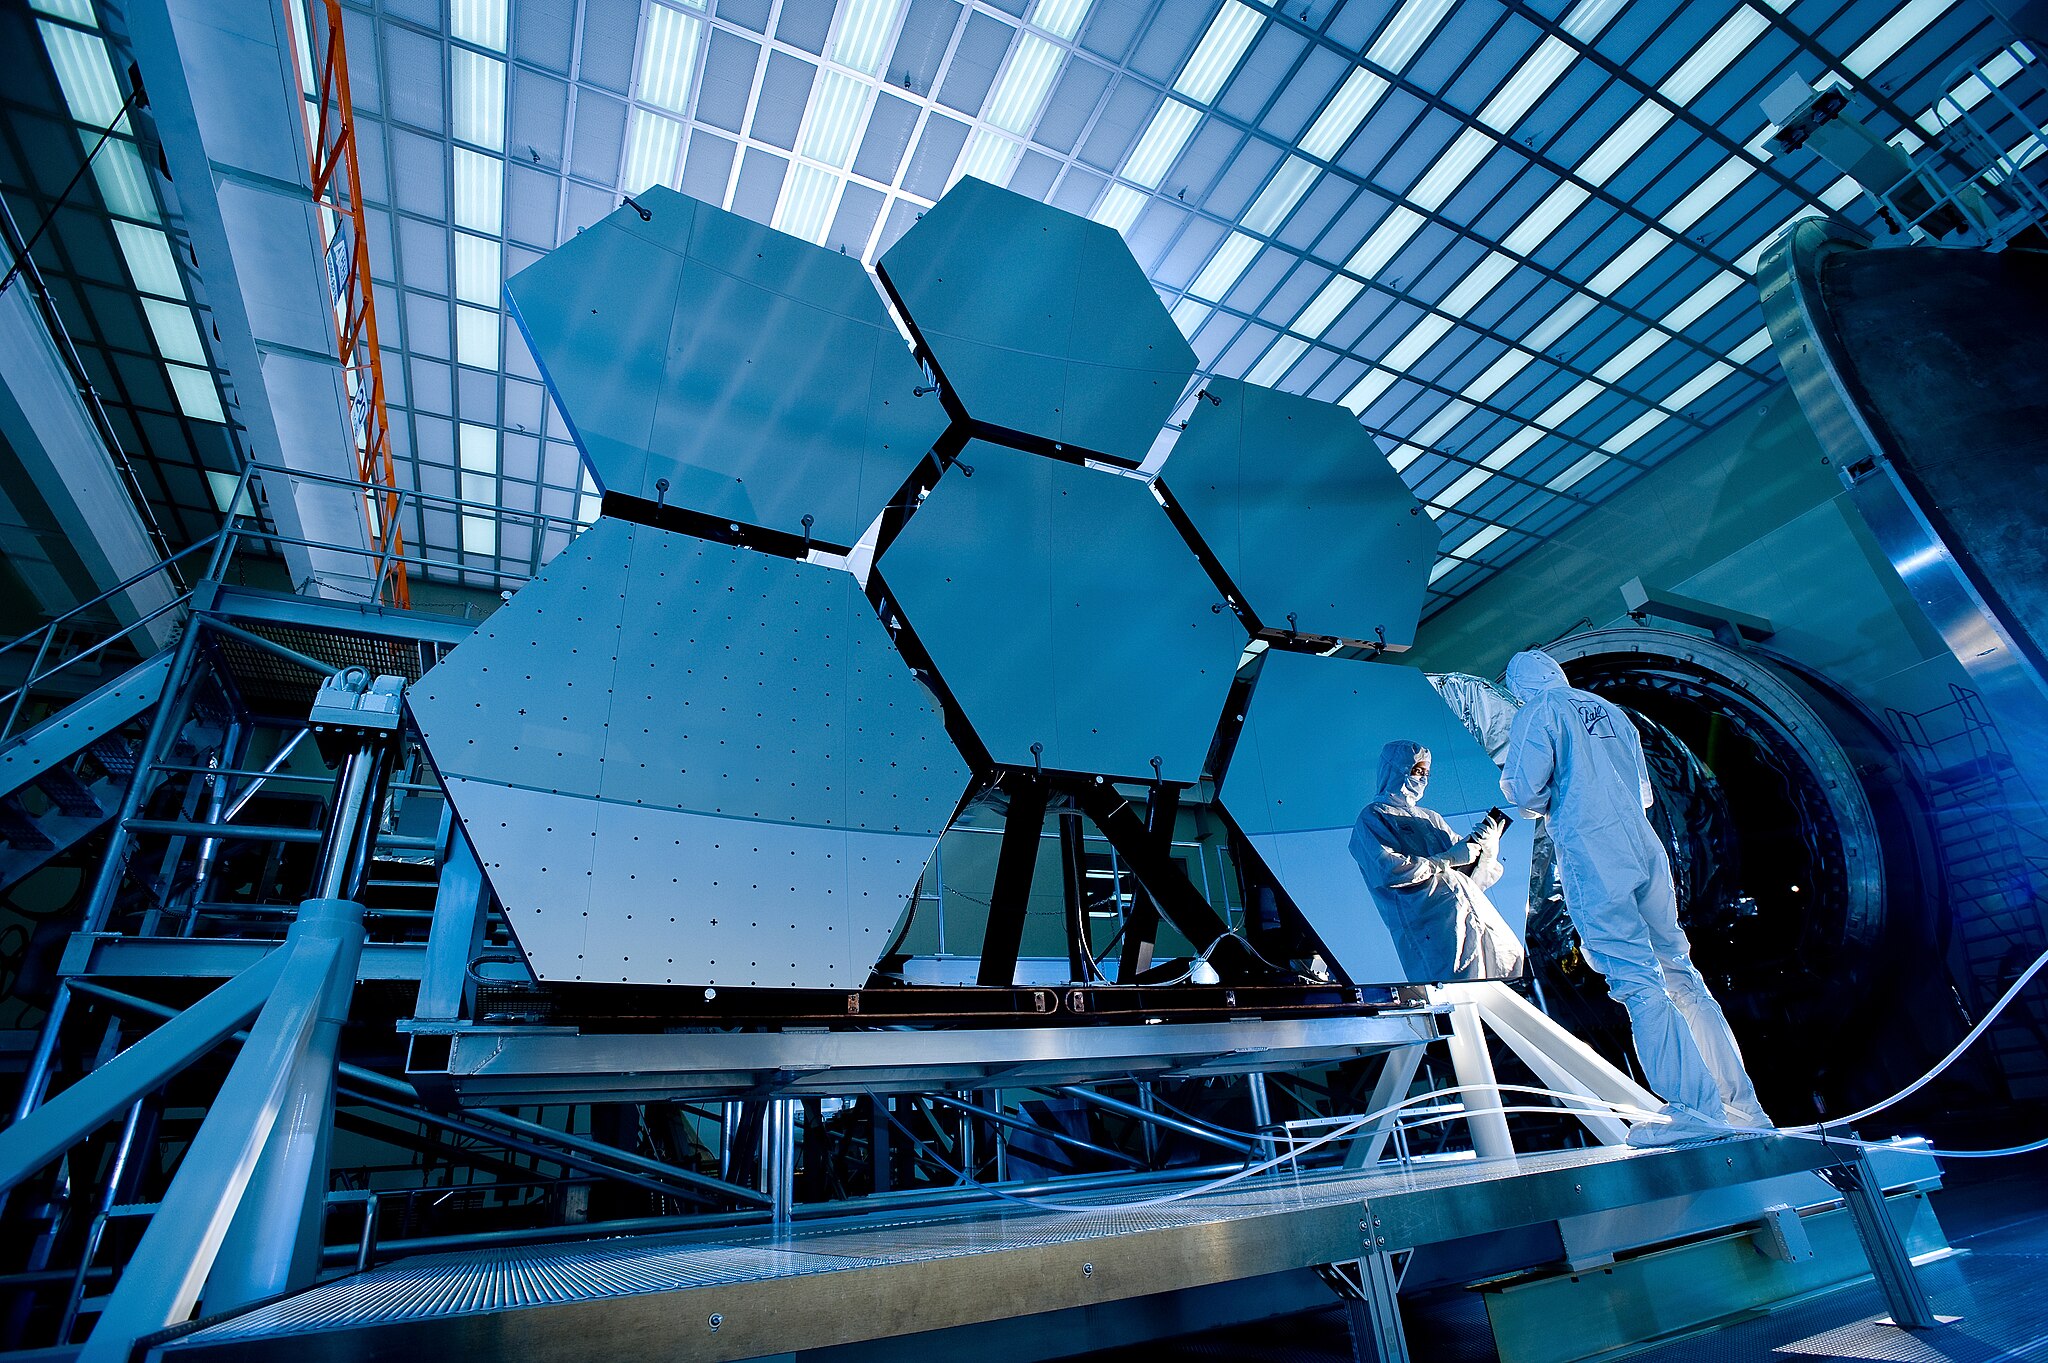 Engineers inspecting a large, segmented mirror of an astronomical telescope in a laboratory setting.